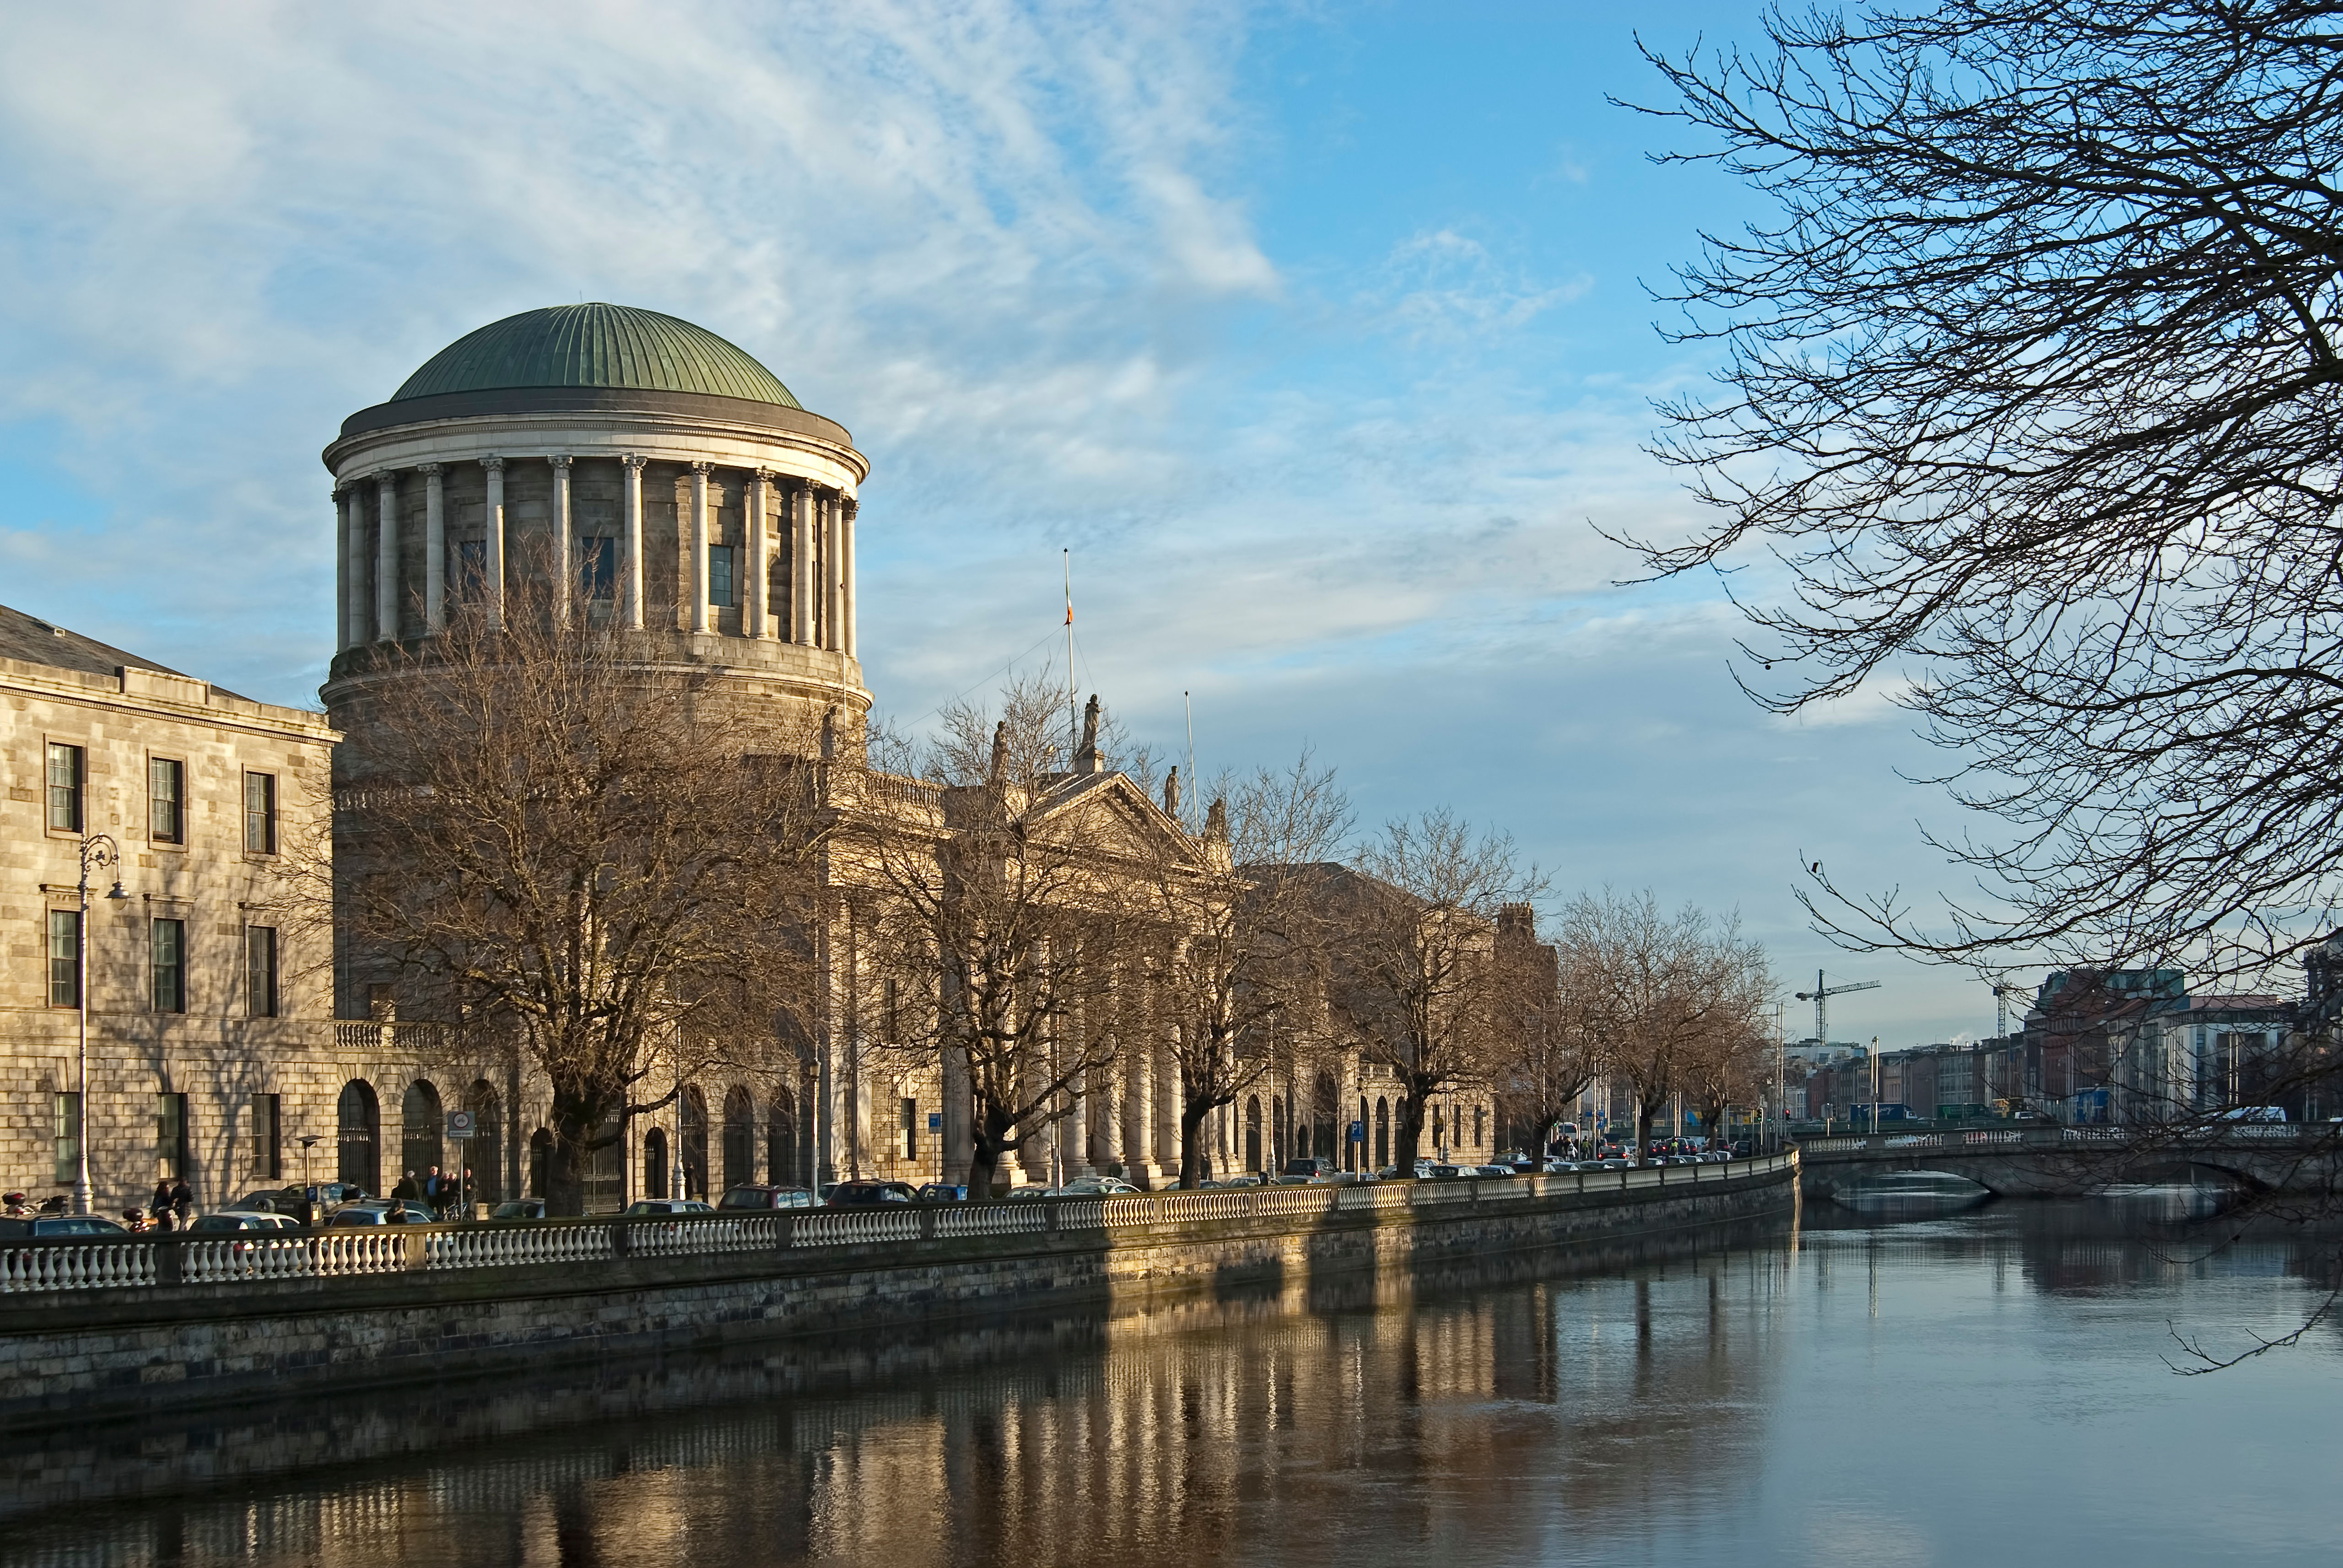 The Four Courts in Dublin which houses the High Court 